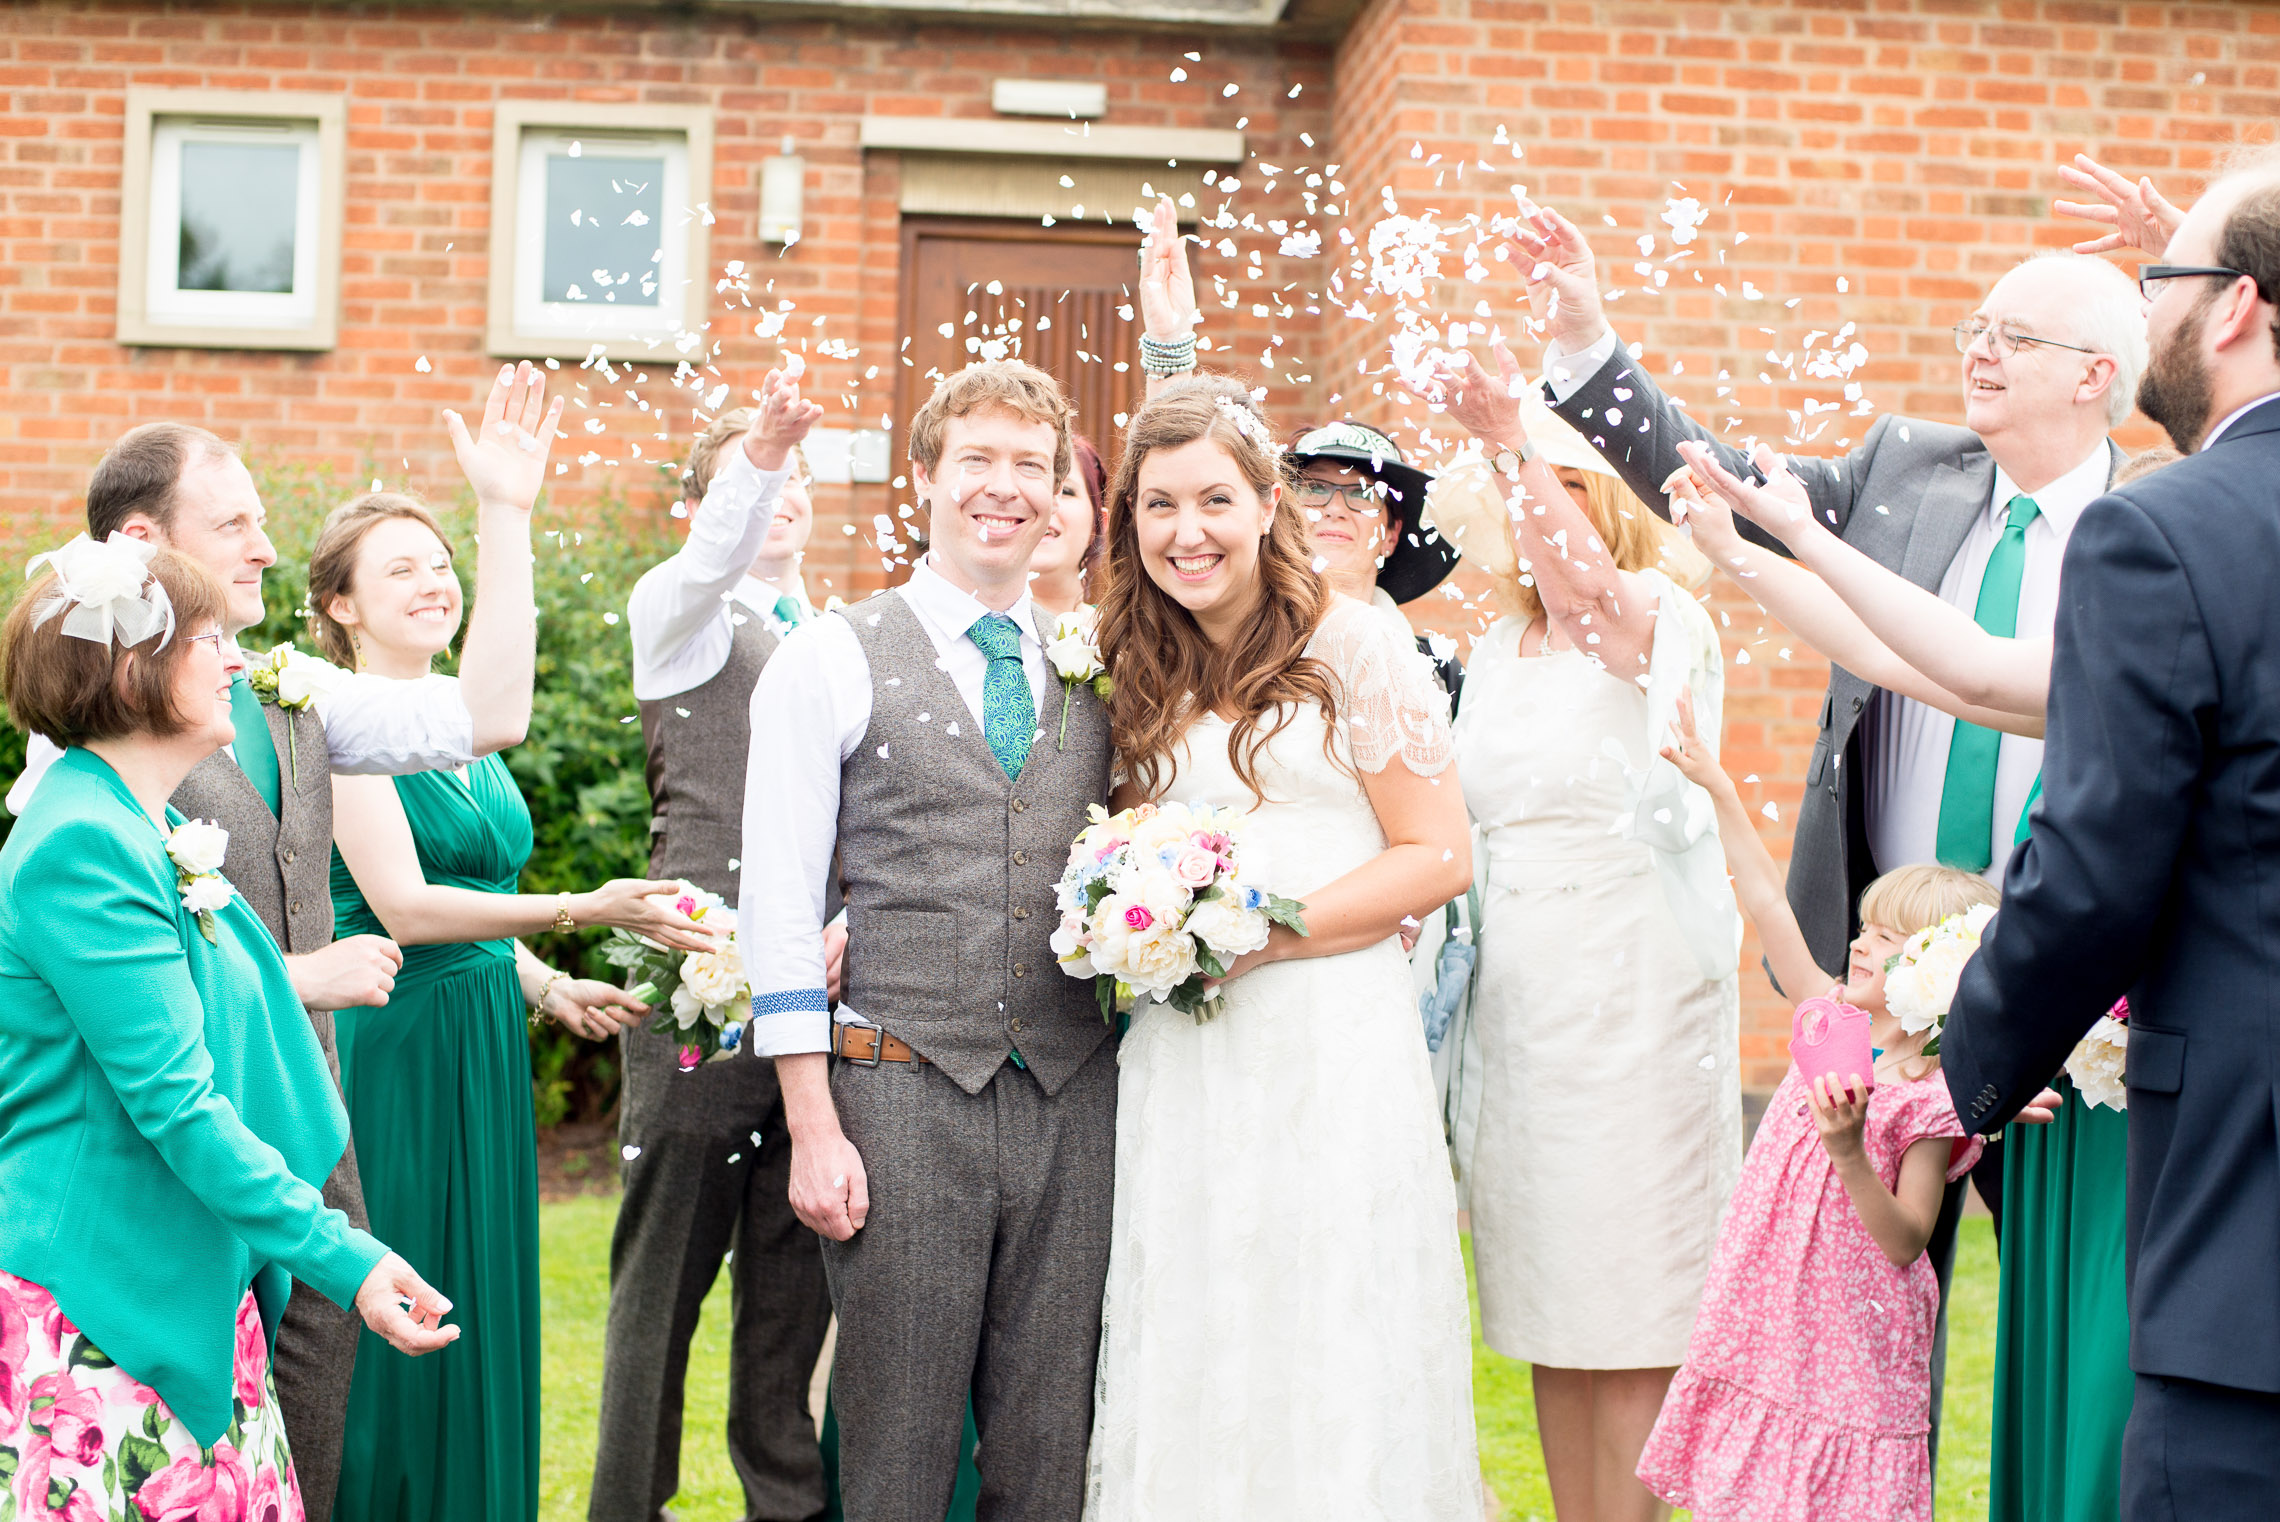 Confetti shot with the bridal party